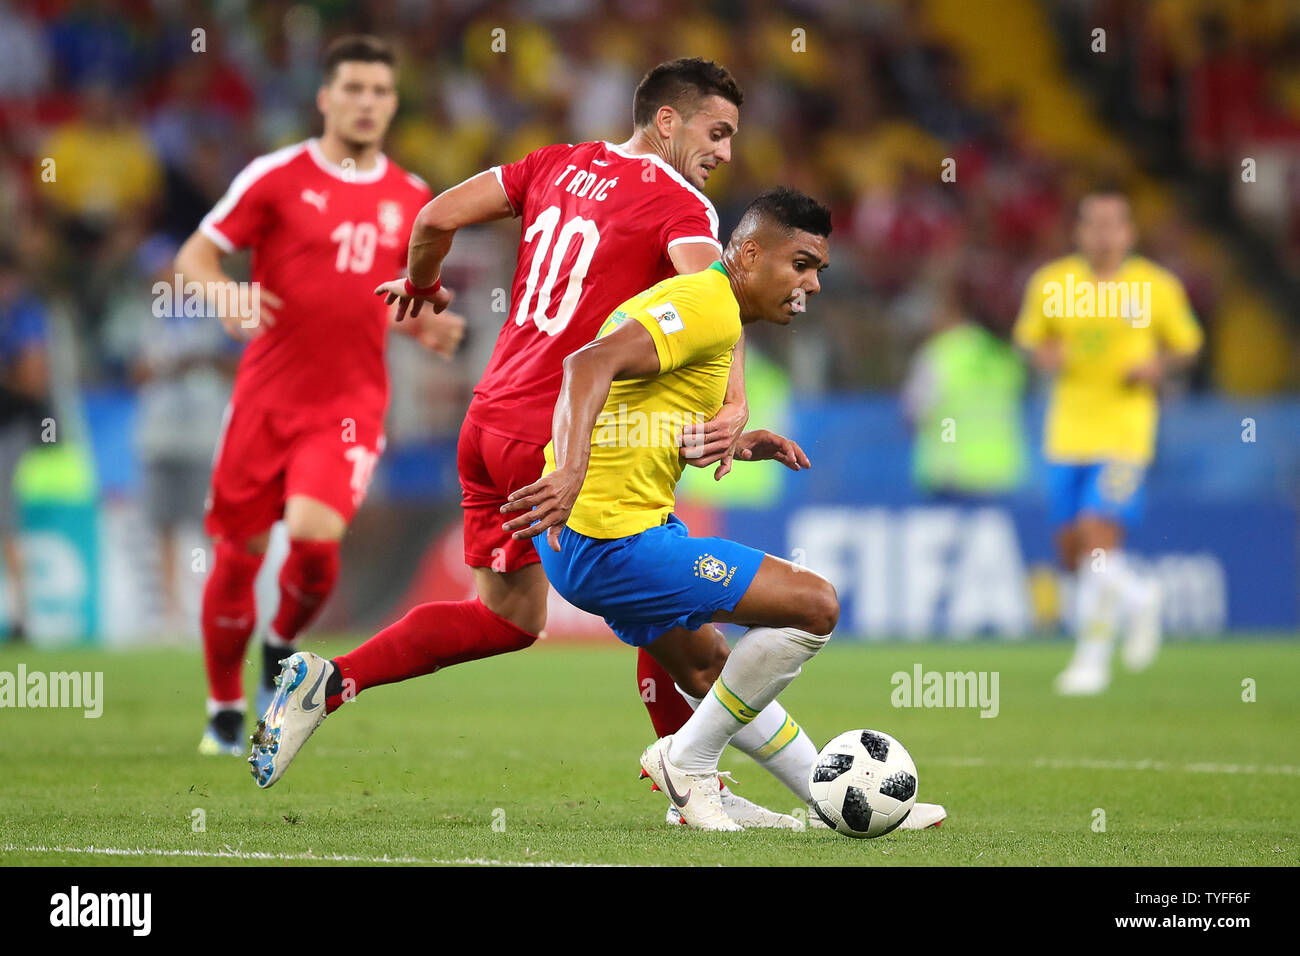 Casemiro (R) of Brazil is challenged by Dusan Tadic of Serbia during the 2018 FIFA World Cup Group E match at Spartak Stadium in Moscow, Russia on June 27, 2018. Brazil beat Serbia 2-0 to qualify for the round of 16. Photo by Chris Brunskill/UPI Stock Photo